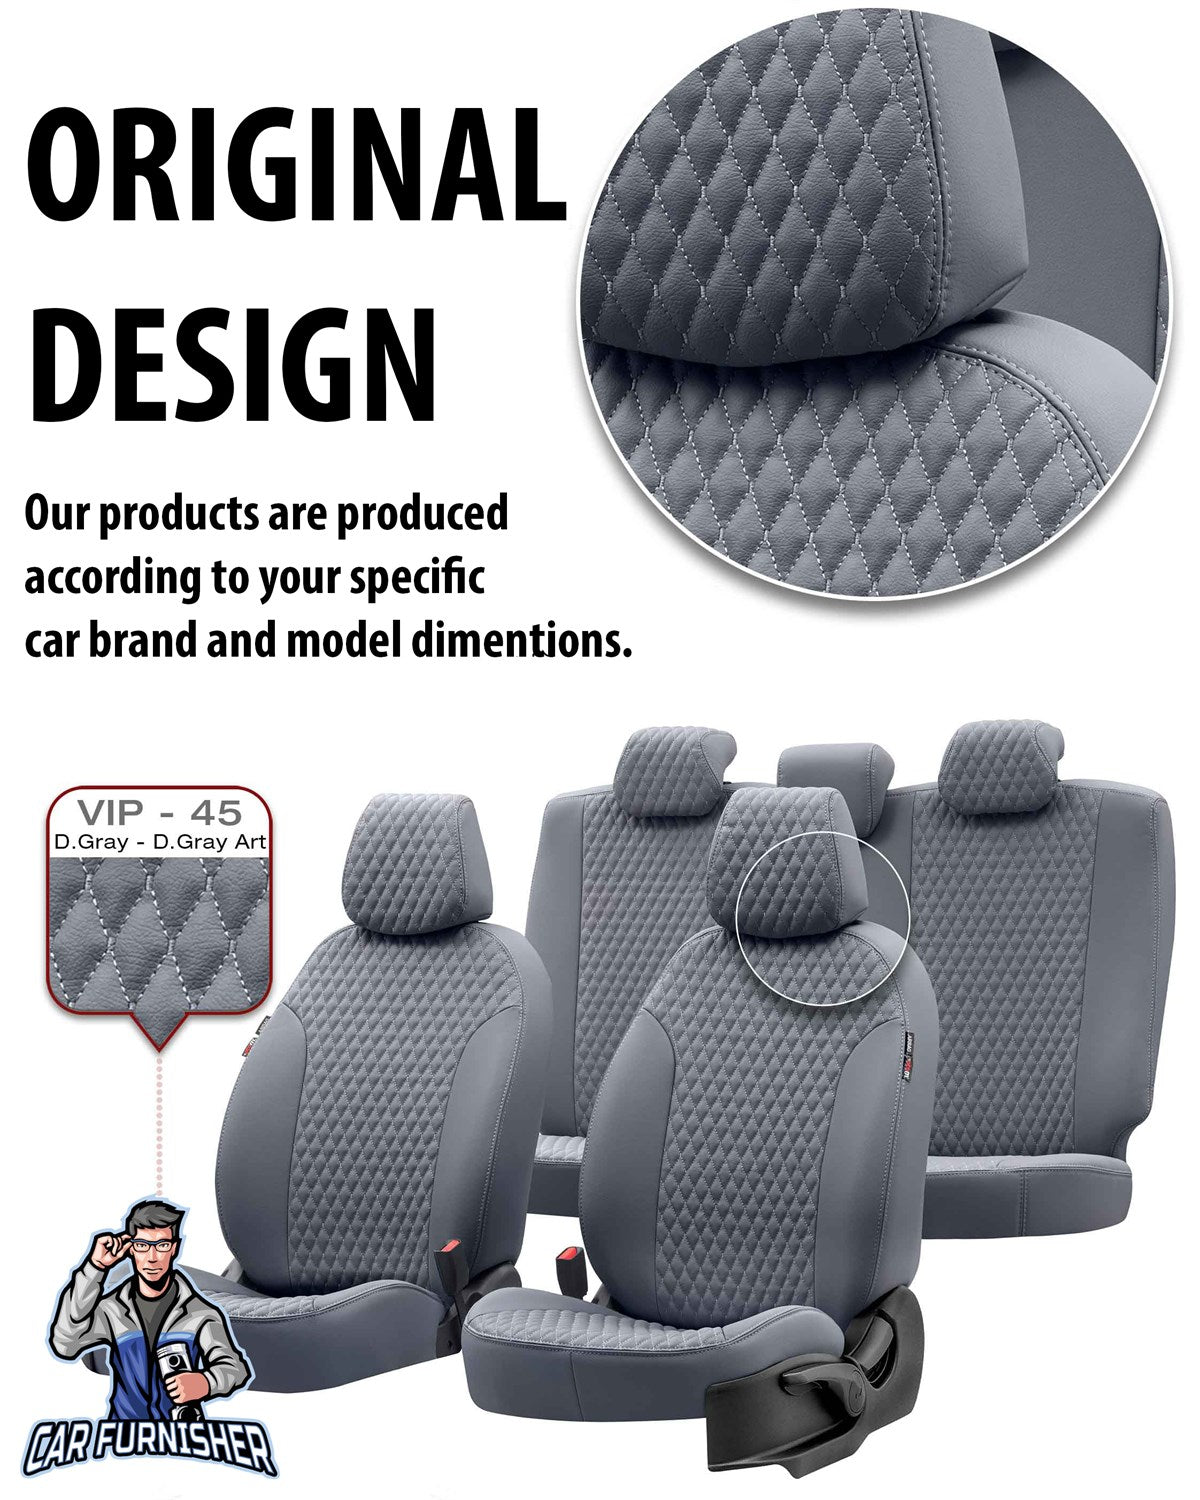 Renault Master Seat Covers Amsterdam Leather Design Black Leather